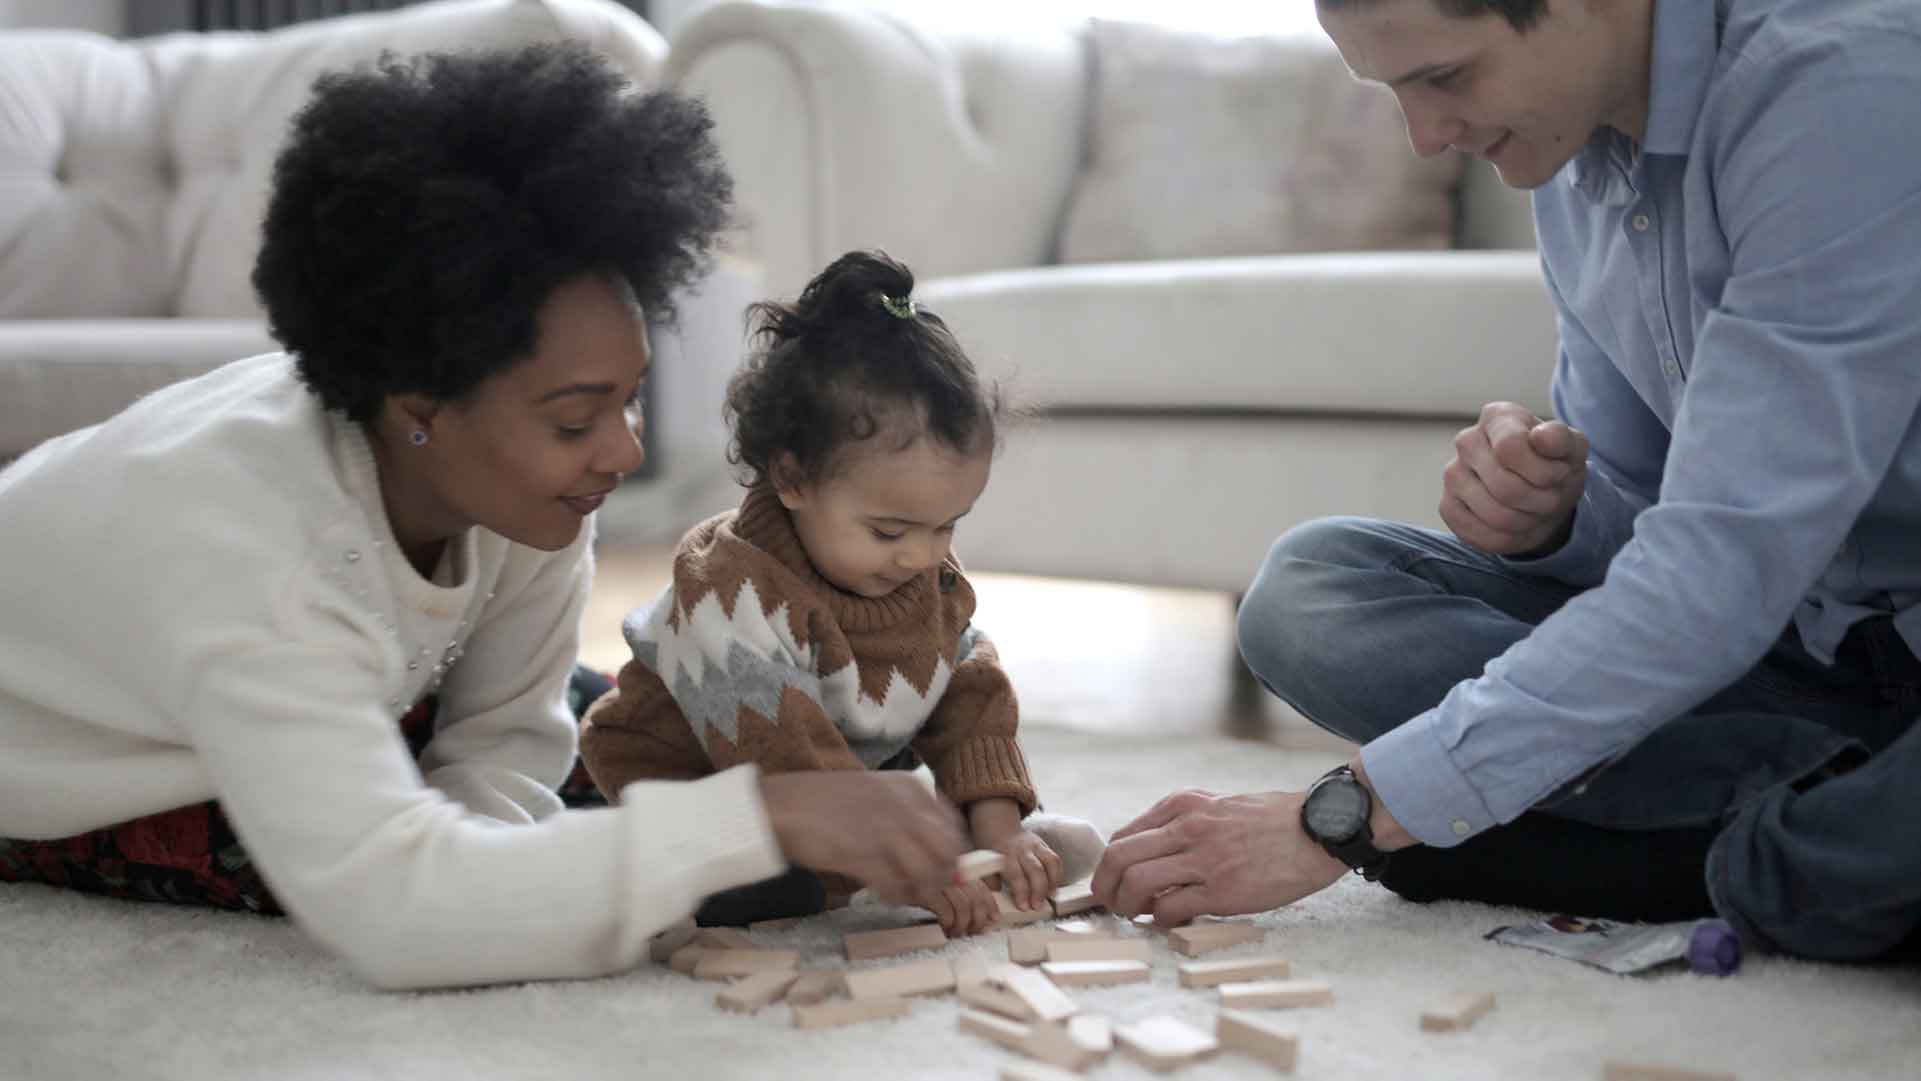 Multiracial family playing with blocks